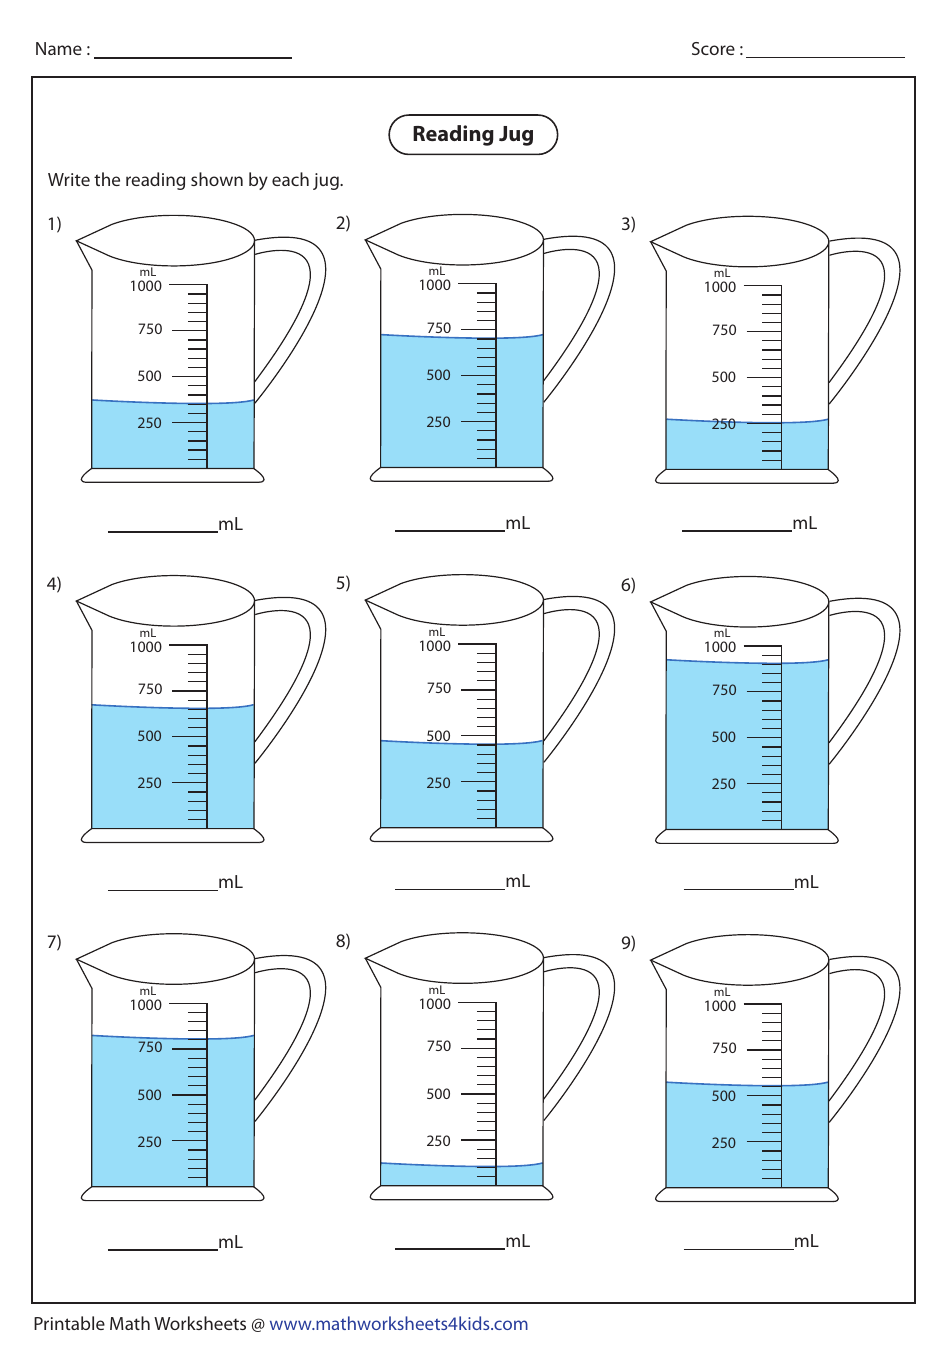 Preview of the Reading Jug Data Analyzing Worksheet With Answer Key document